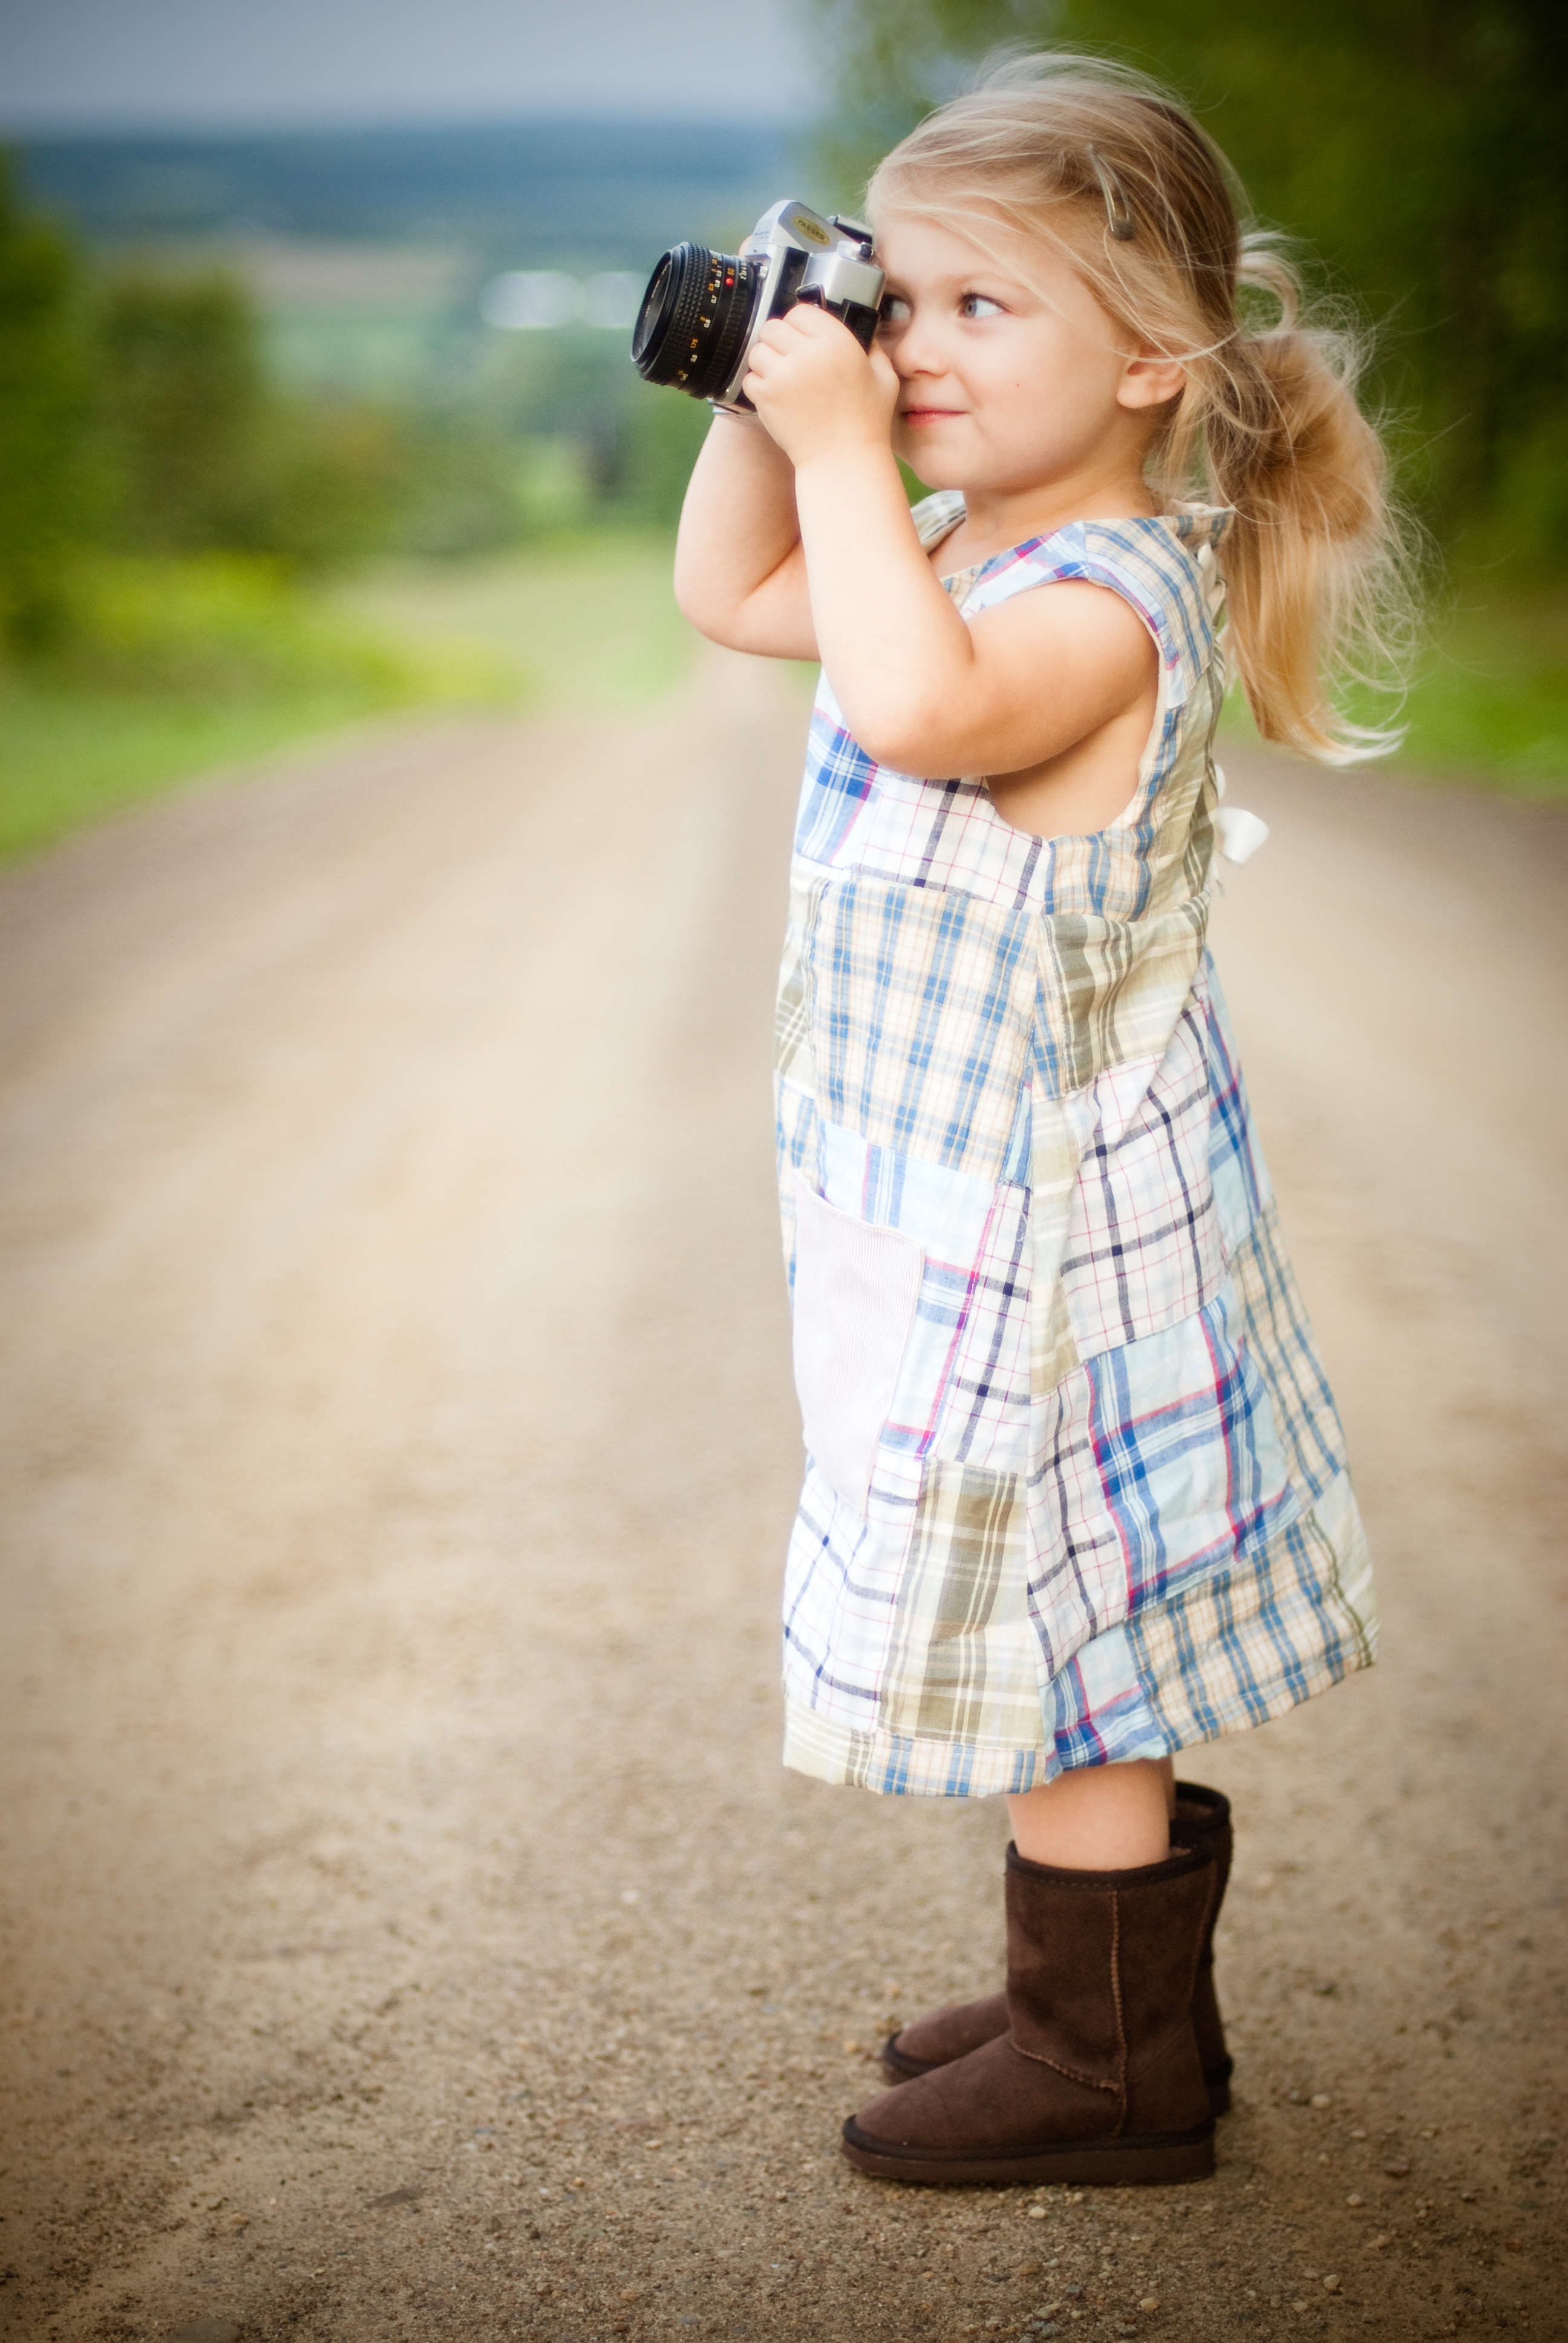 Girl with blonde hair and wearing blue and white plaid dress and capturing picture during daytime photo